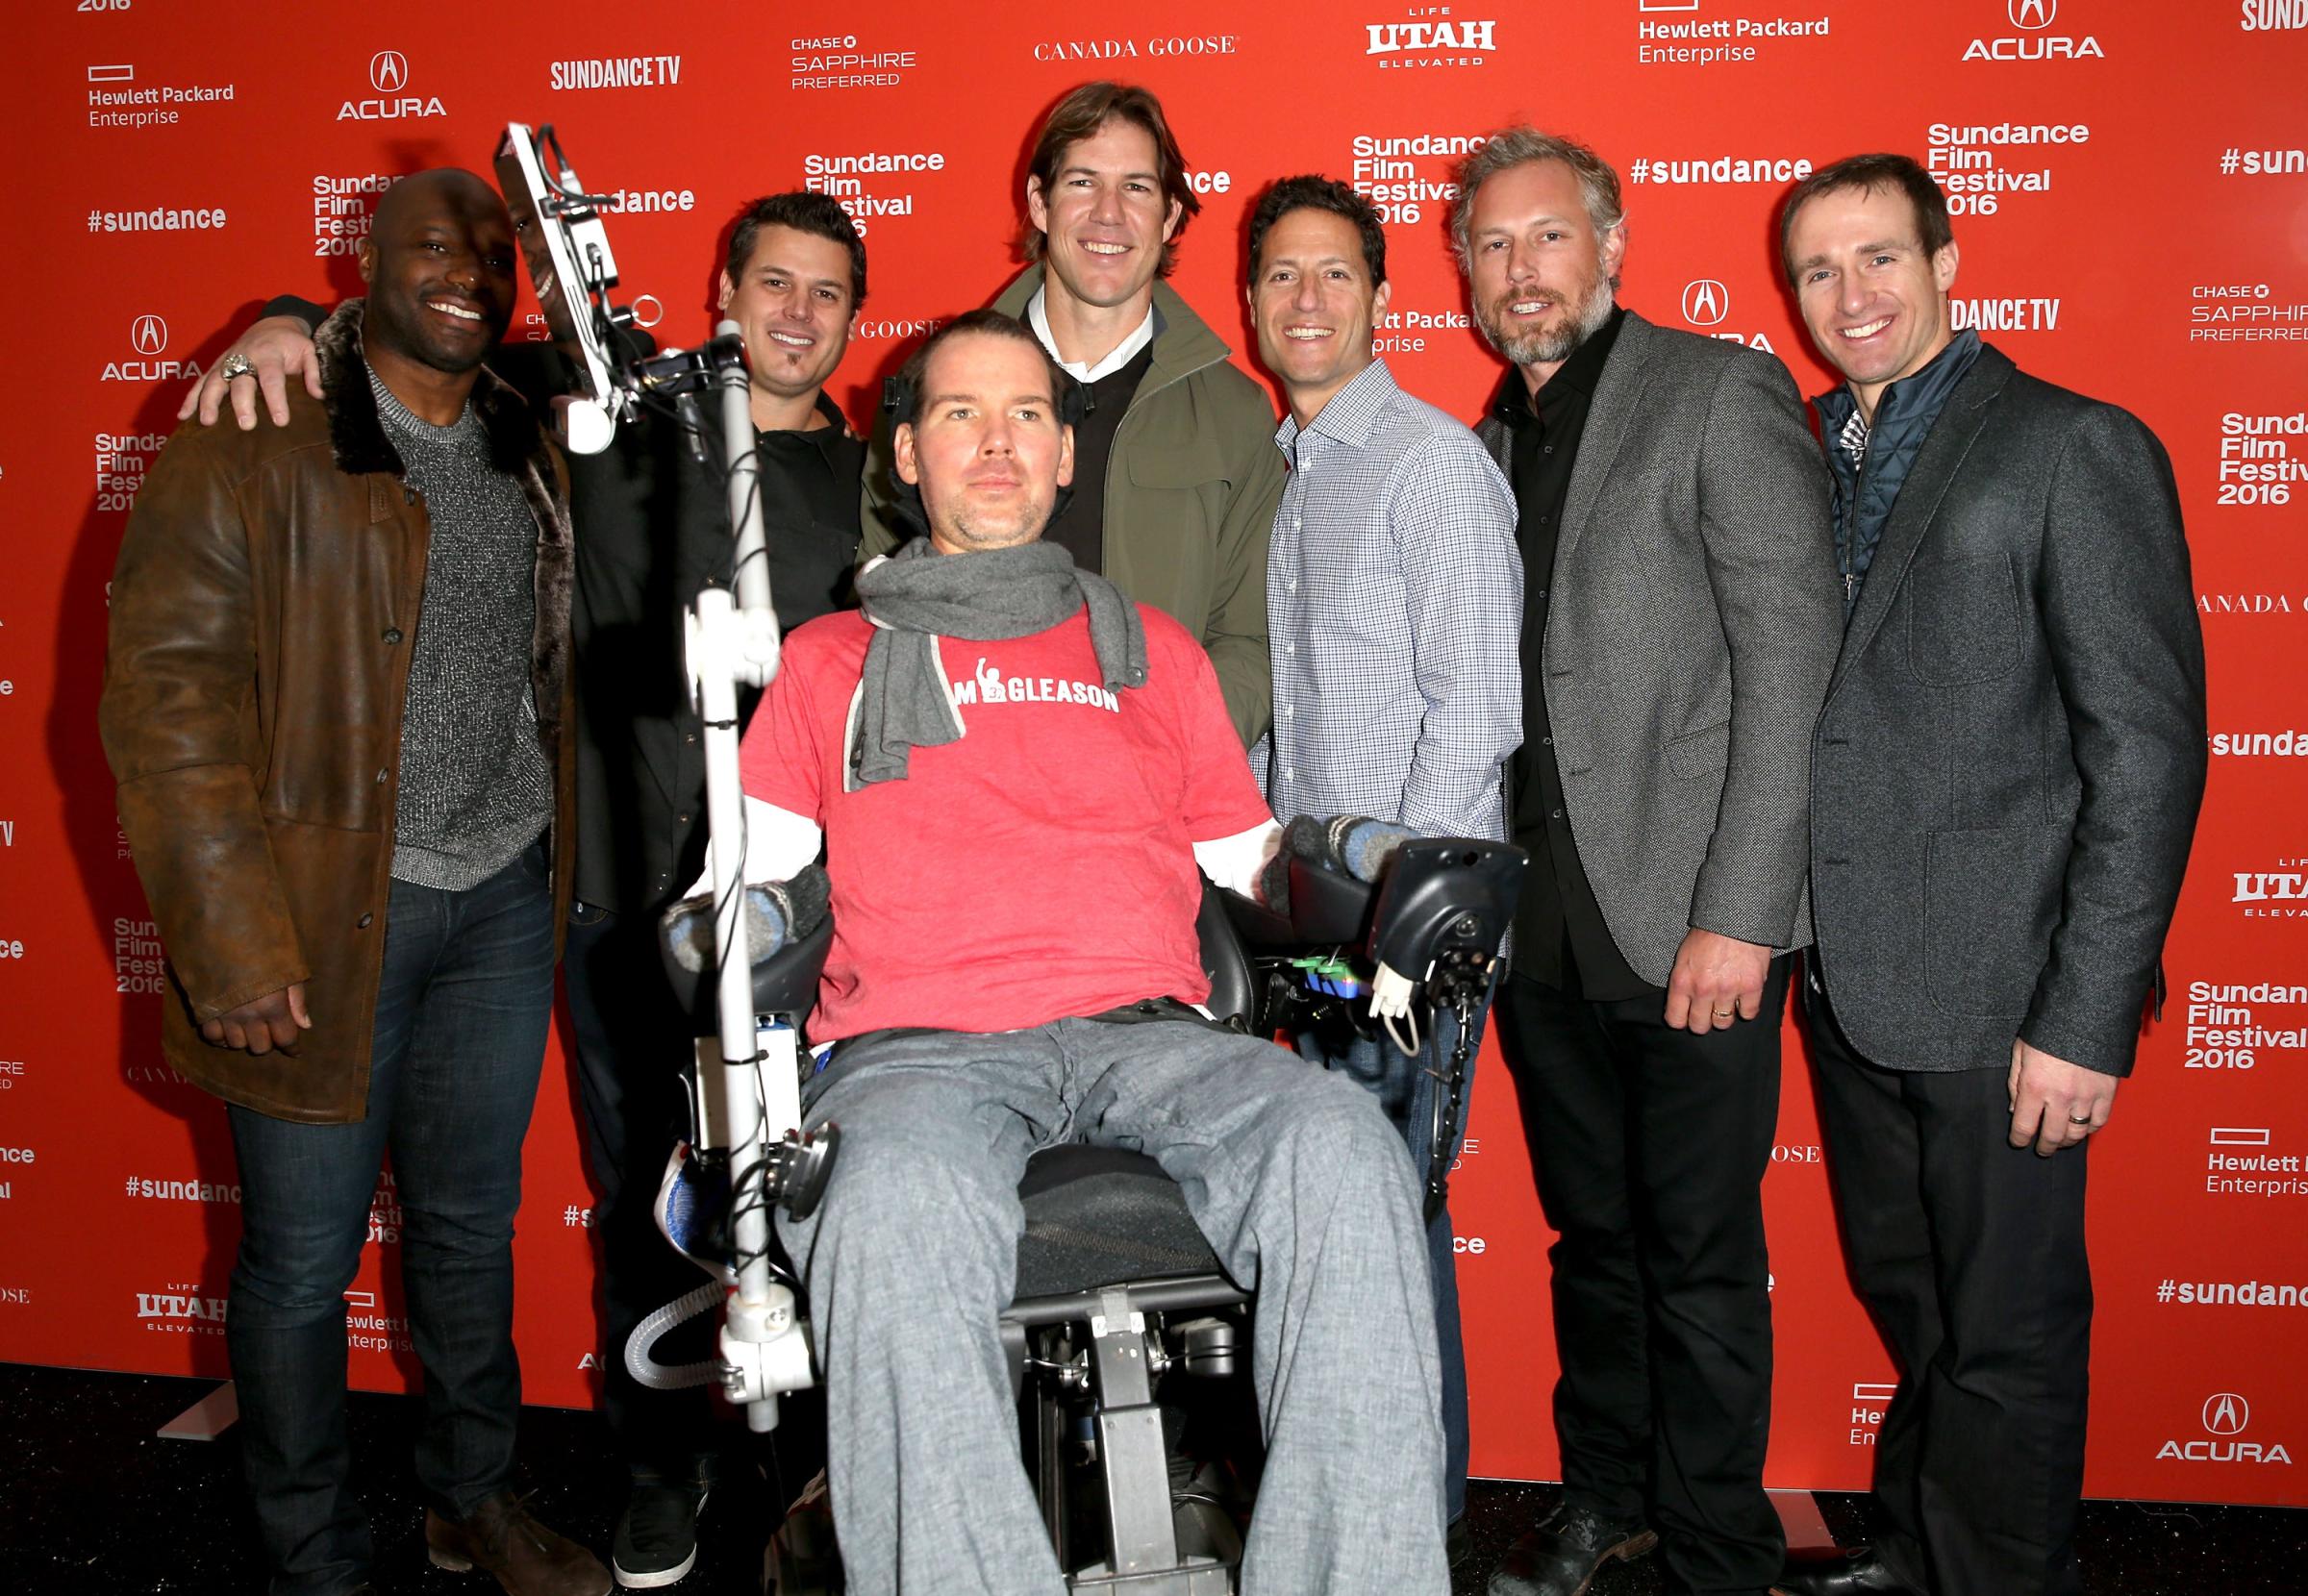 NFL player D'Qwell Jackson, former NFL player Lonie Paxton, film subject Steve Gleason, producer Scott Fujita, Chief Content Officer for IMG Mark Shapiro, former NFL player Eric Johnson, and NFL quarterback Drew Brees attend the "Gleason" Premiere during the 2016 Sundance Film Festival on January 23, 2016 in Park City, Utah.